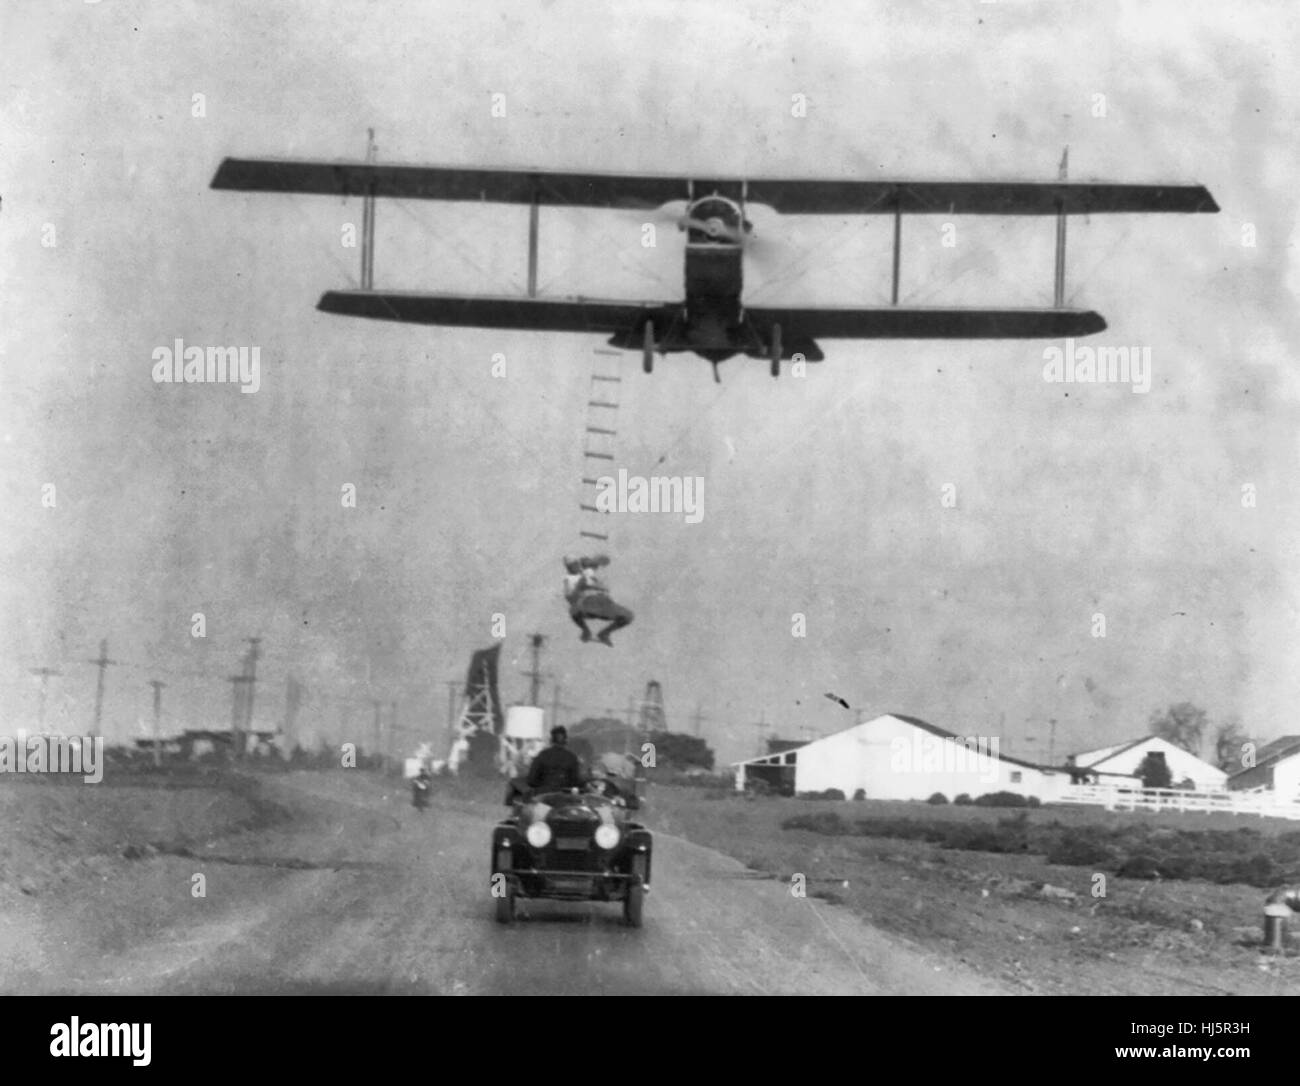 'Fearless Freddie', a Hollywood stunt man, clinging to a rope ladder slung from a plane flown by A.M. Maltrup, about to drop into automobile below: automobile shown. 1921 Stock Photo